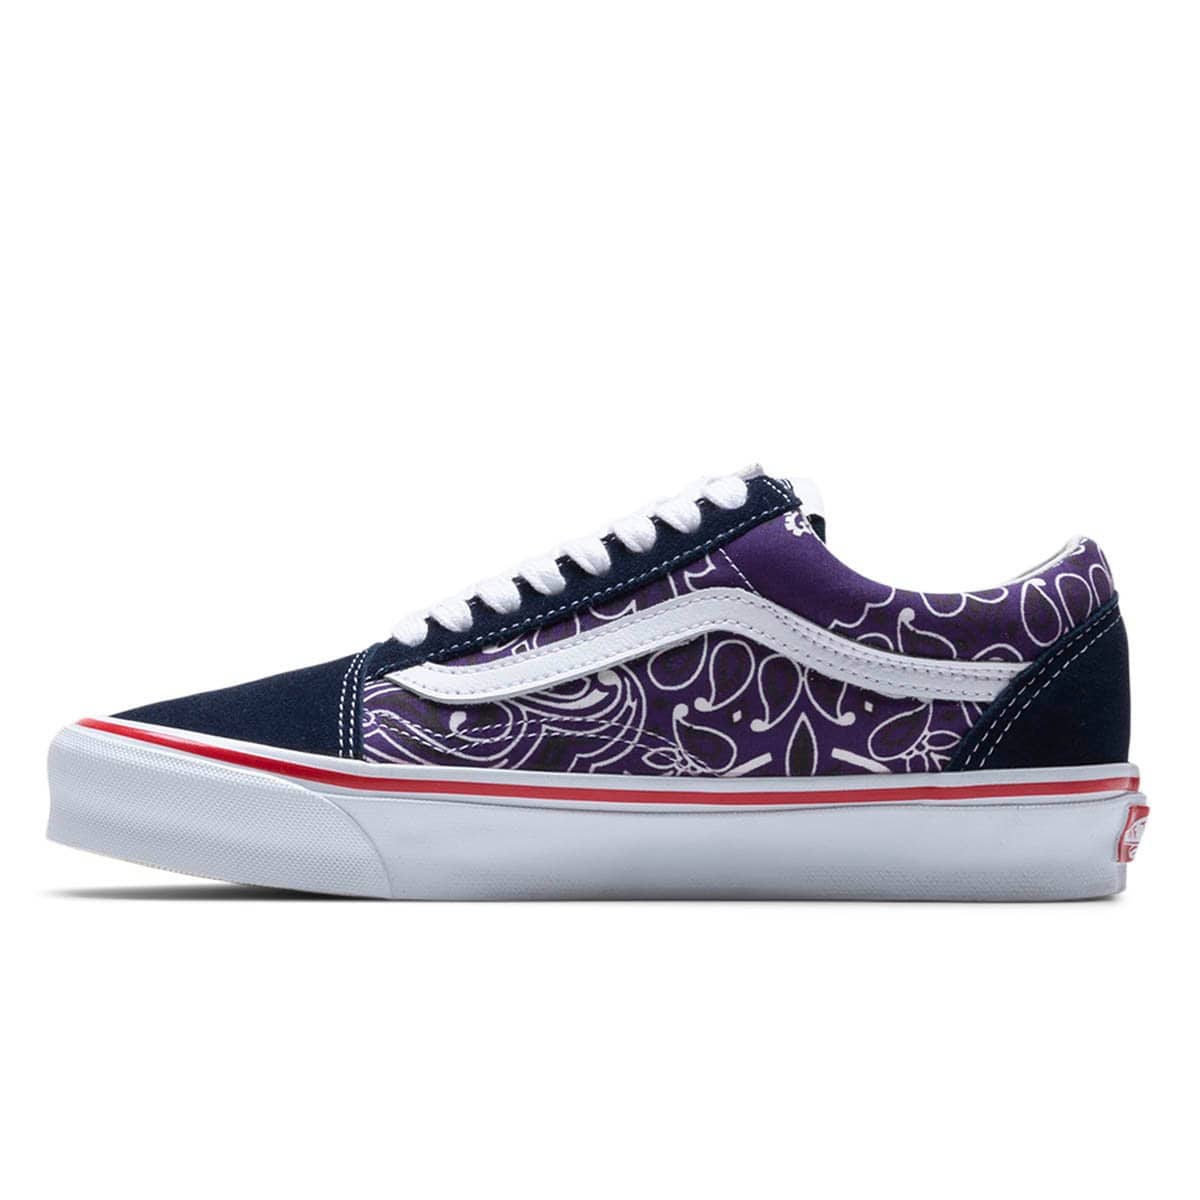 Vault by Vans Casual x Bedwin and the Heartbreakers OG OLD SKOOL LX